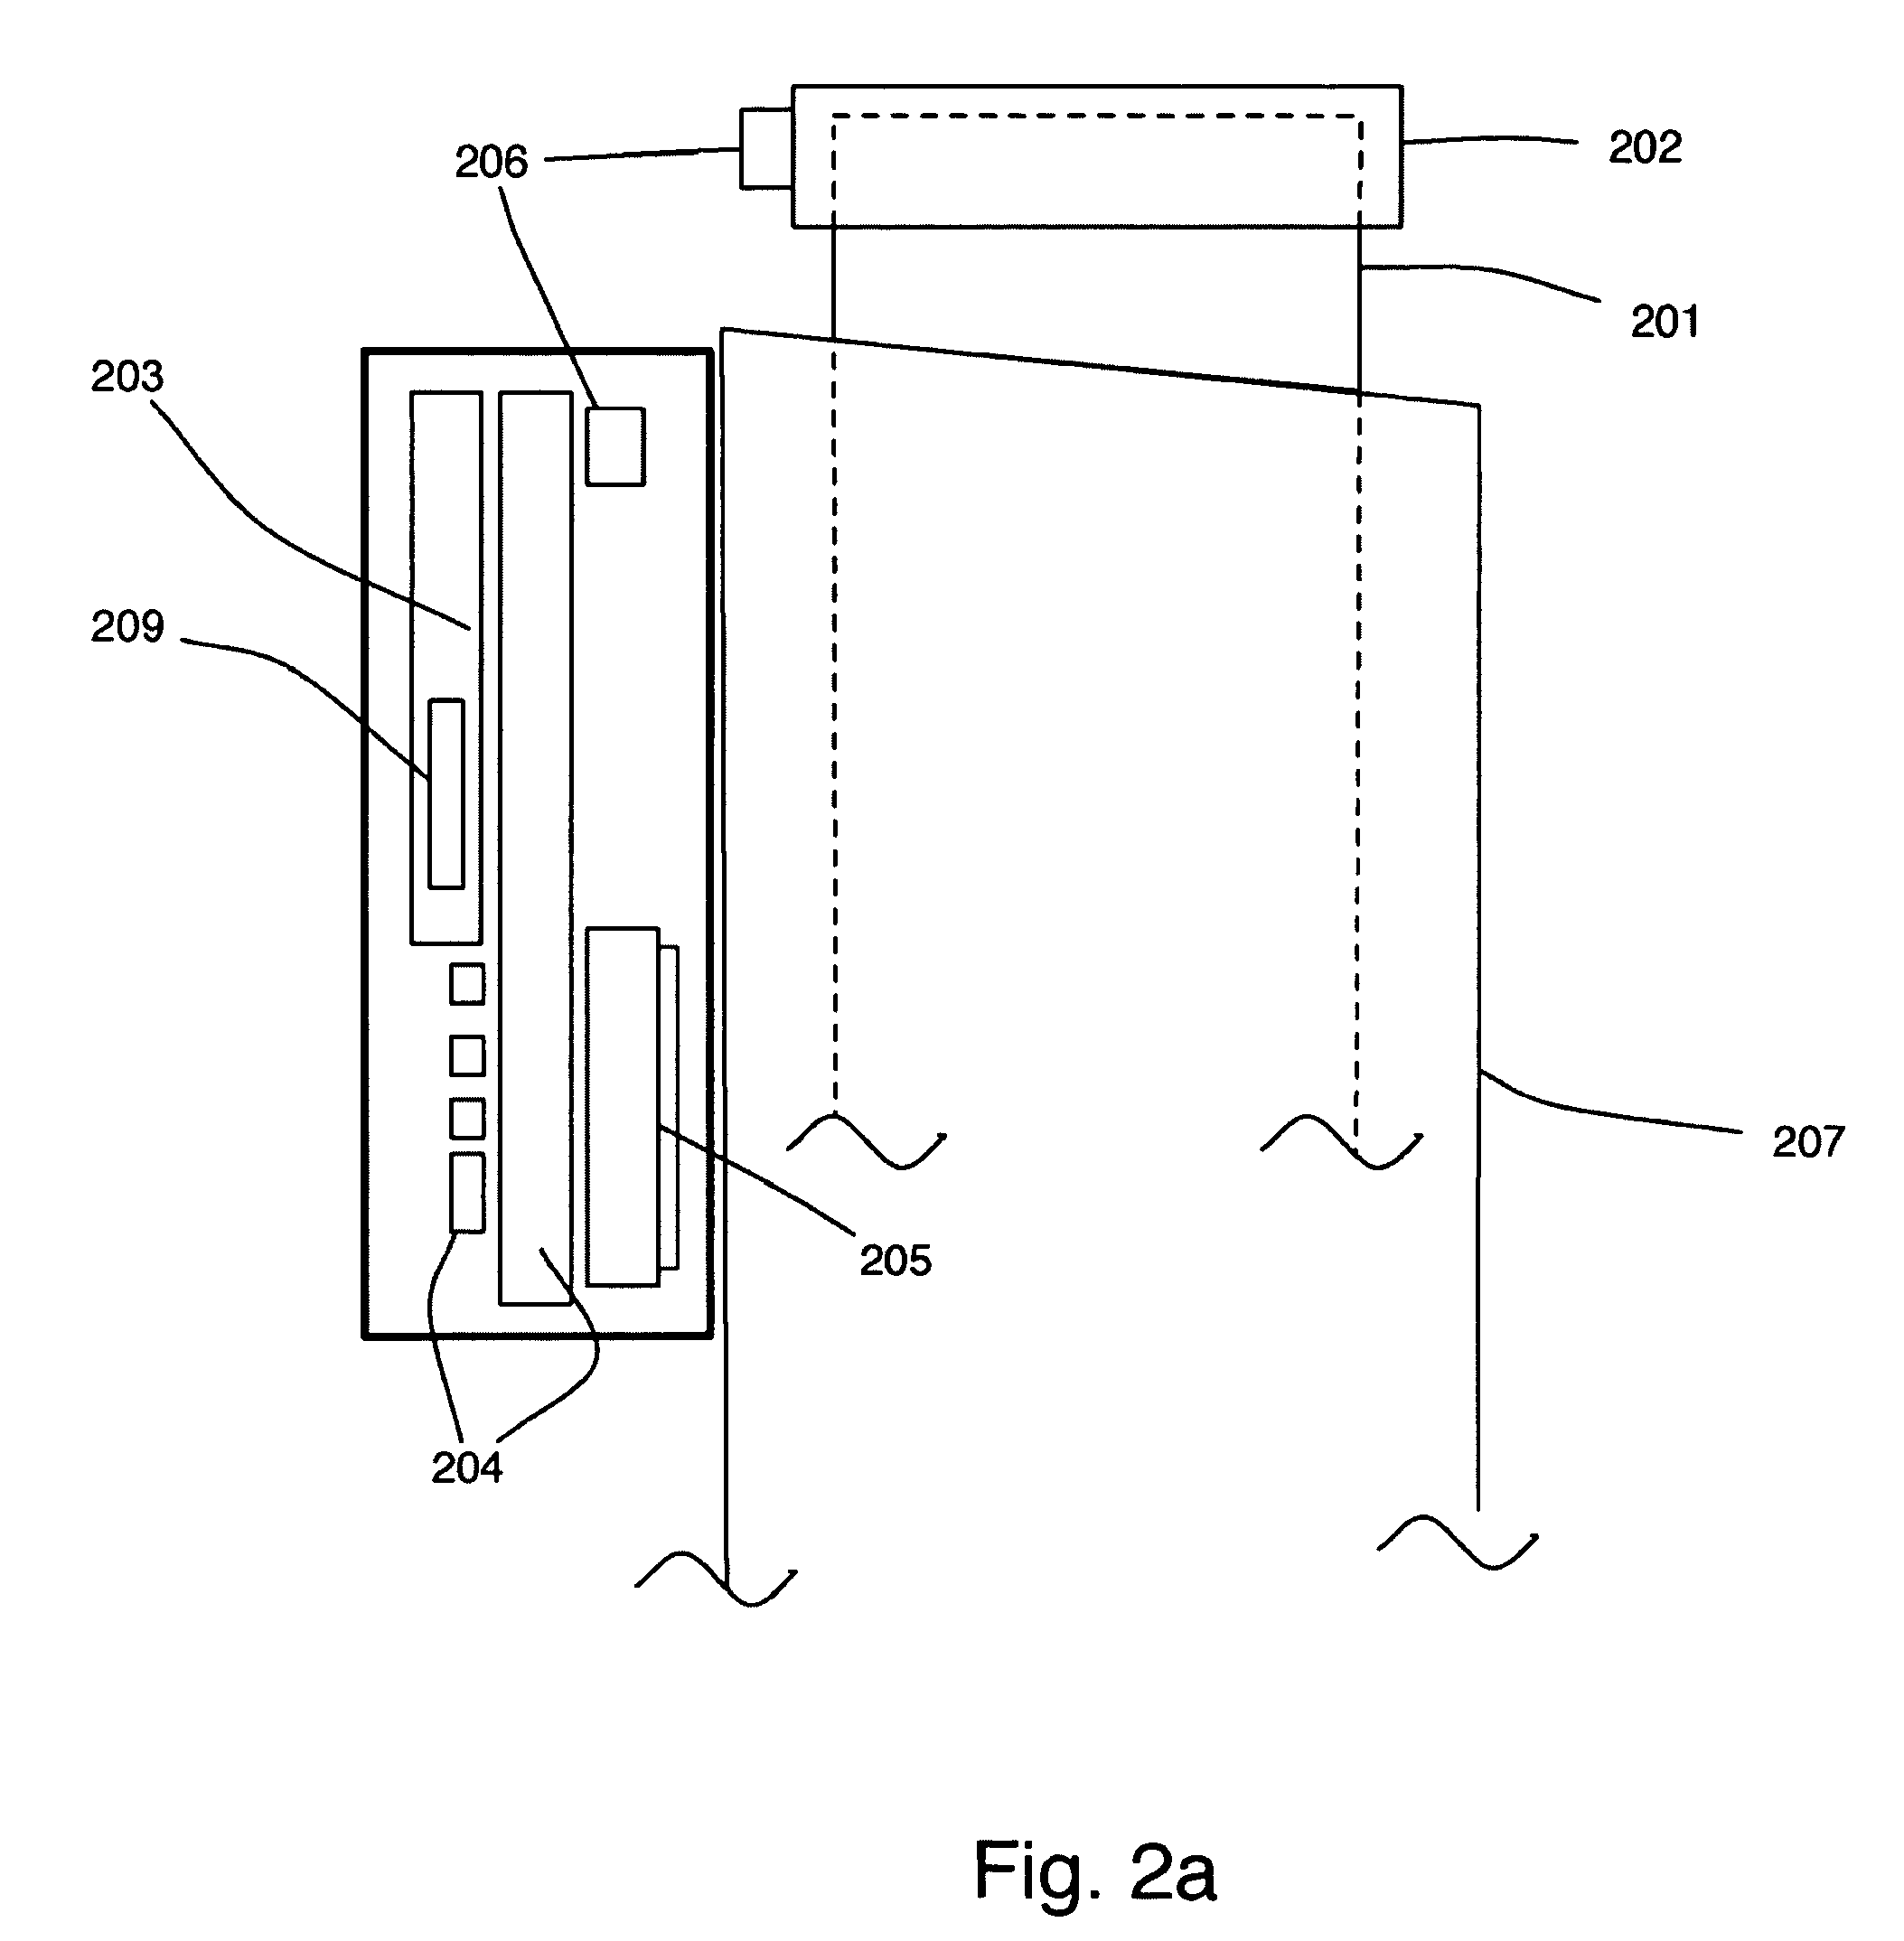 Device and method to monitor, track, map, and analyze usage of metered-dose inhalers in real-time